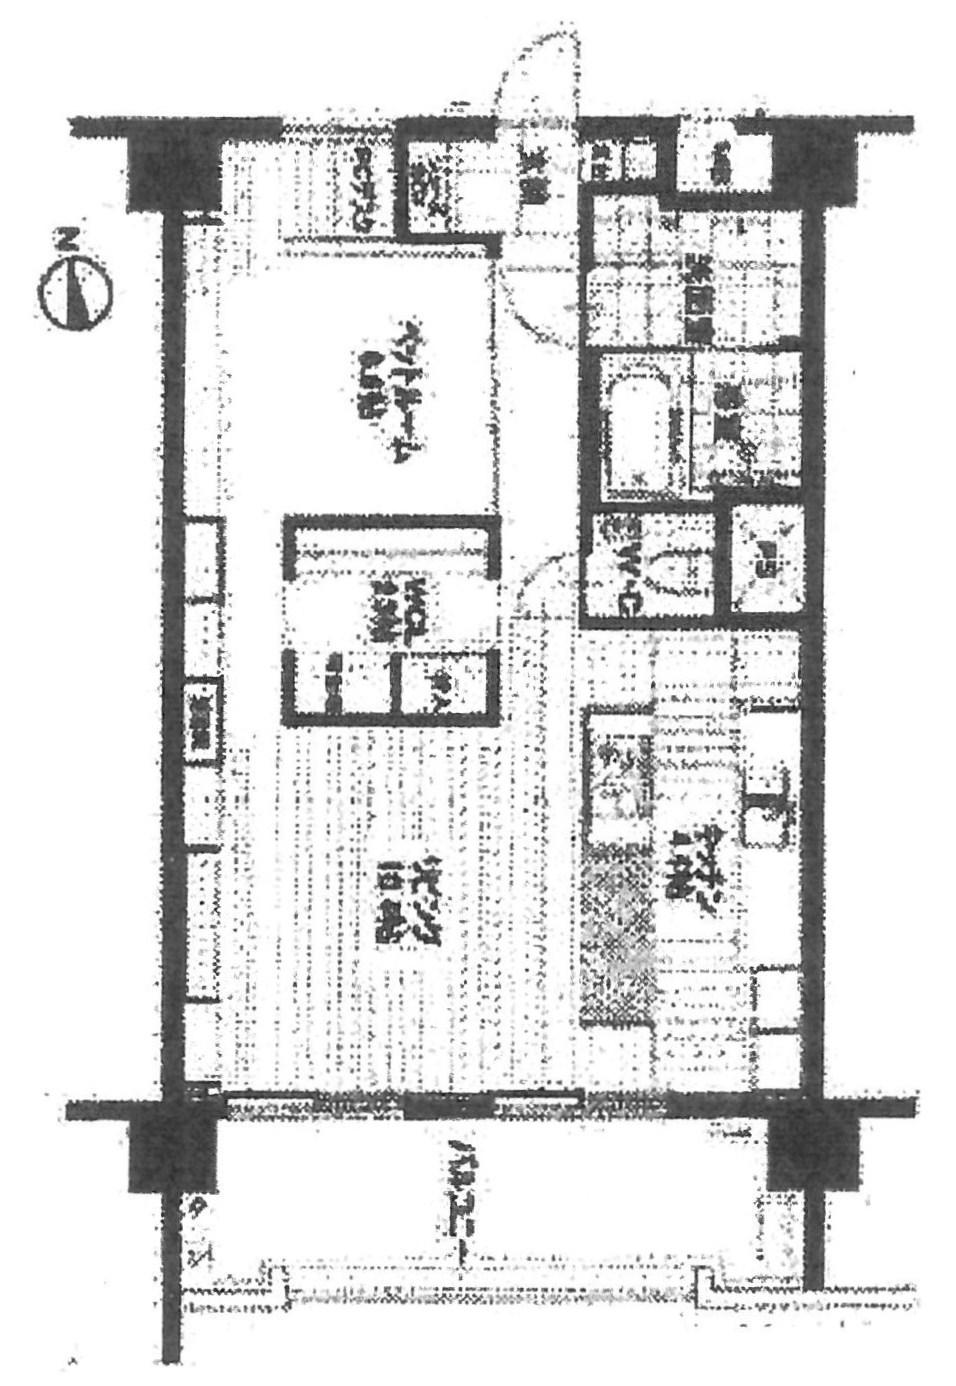 Floor plan. 1LDK, Price 19,800,000 yen, Occupied area 55.08 sq m , Balcony area 10 sq m drawing current state priority